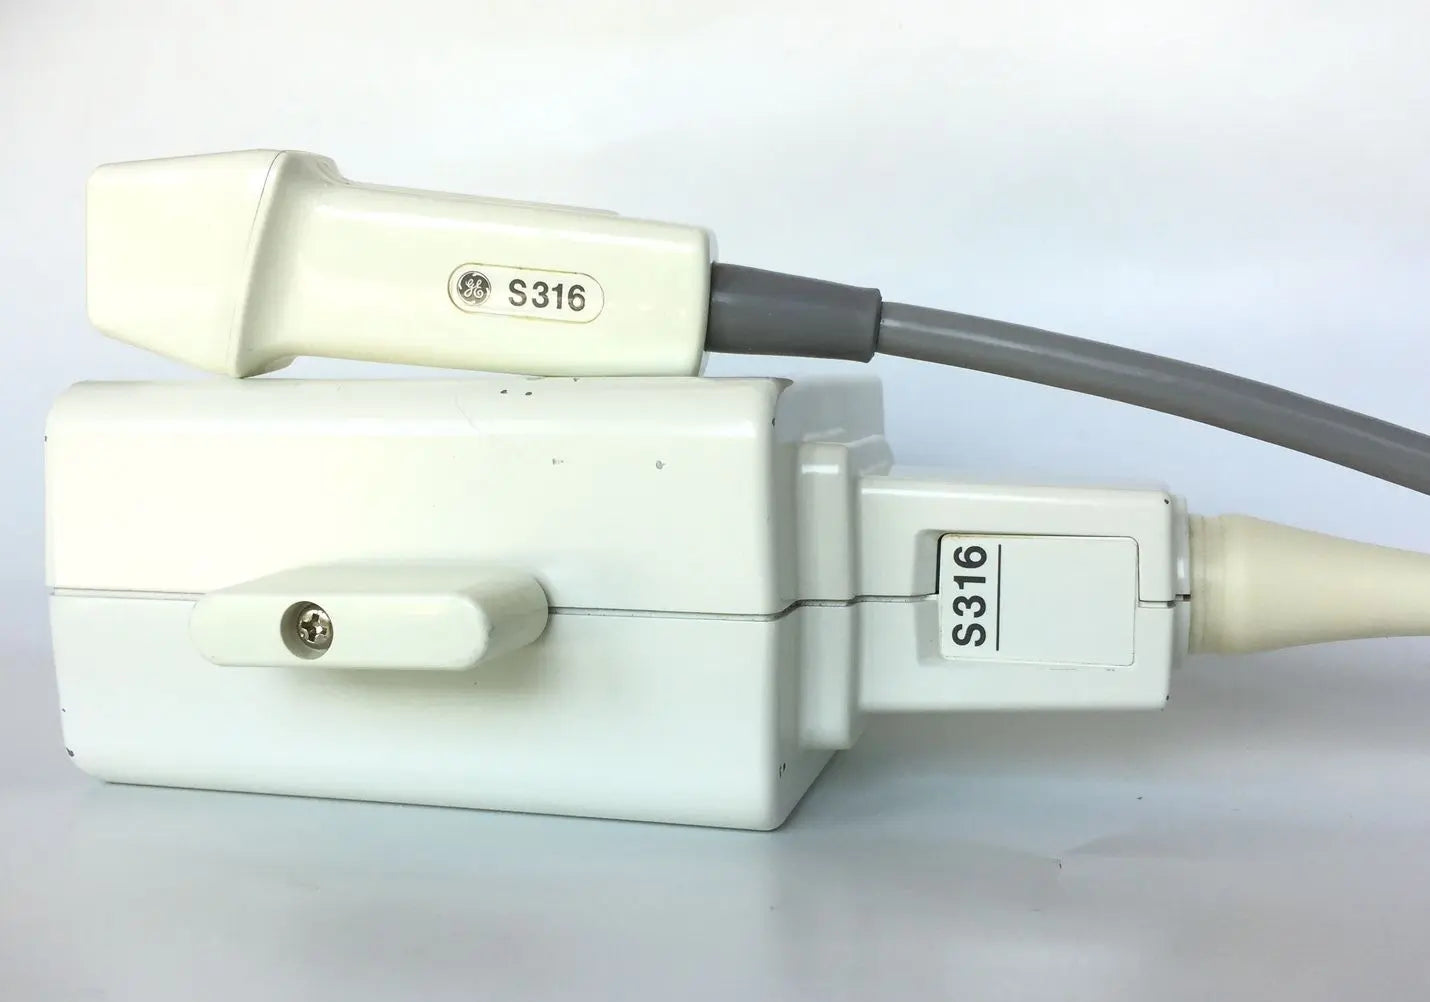 GE S316 Cardiac Sector Ultrasound Transducer Probe (5.0MHz) USED DIAGNOSTIC ULTRASOUND MACHINES FOR SALE